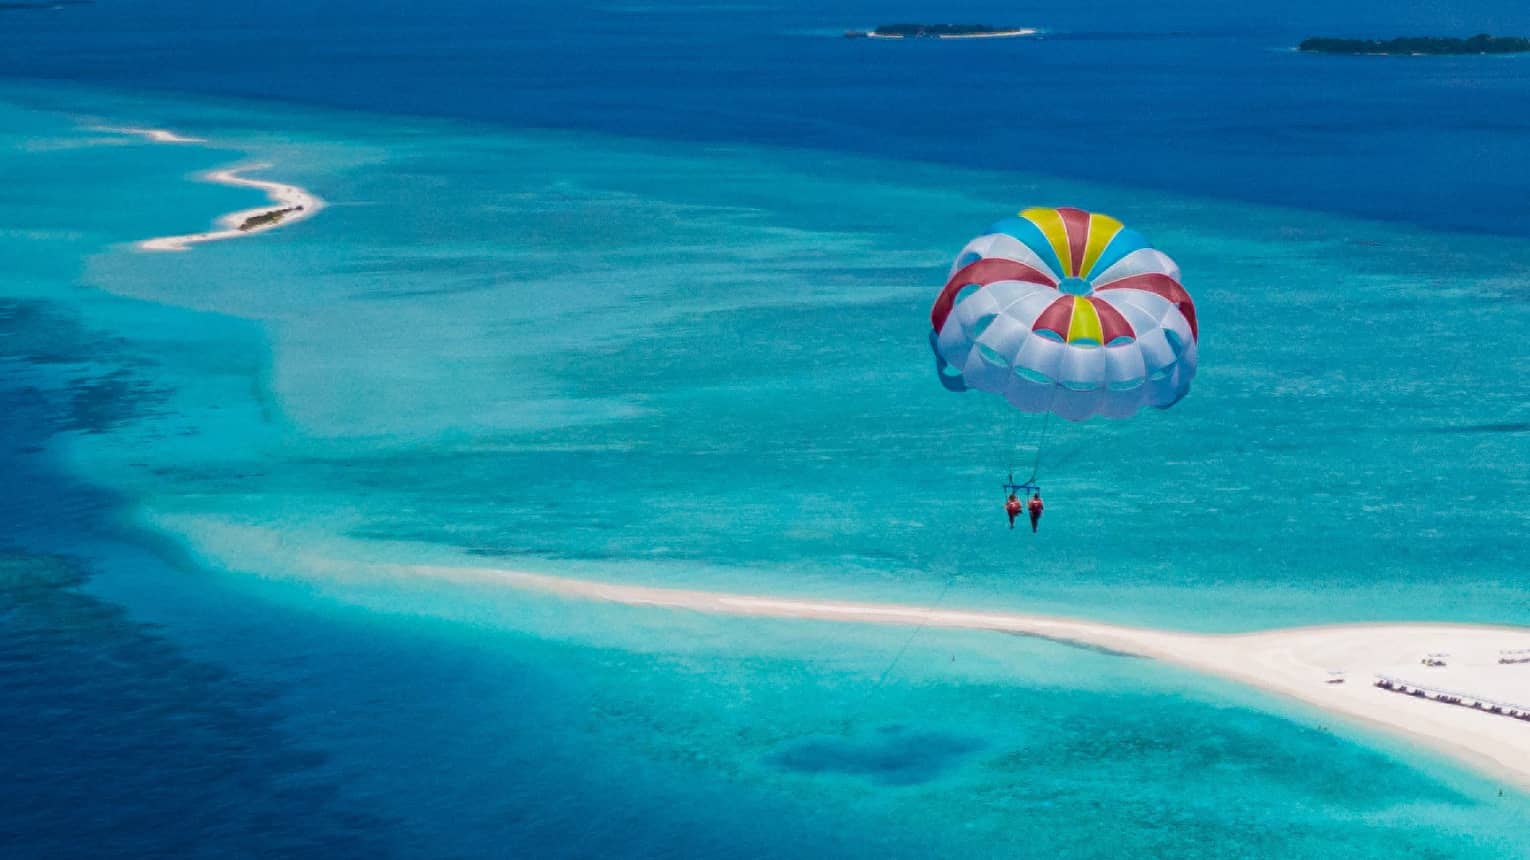 Aerial view of two people parasailing in tandem, colourful sail floating above an expanse of aqua water and a white sandbar.